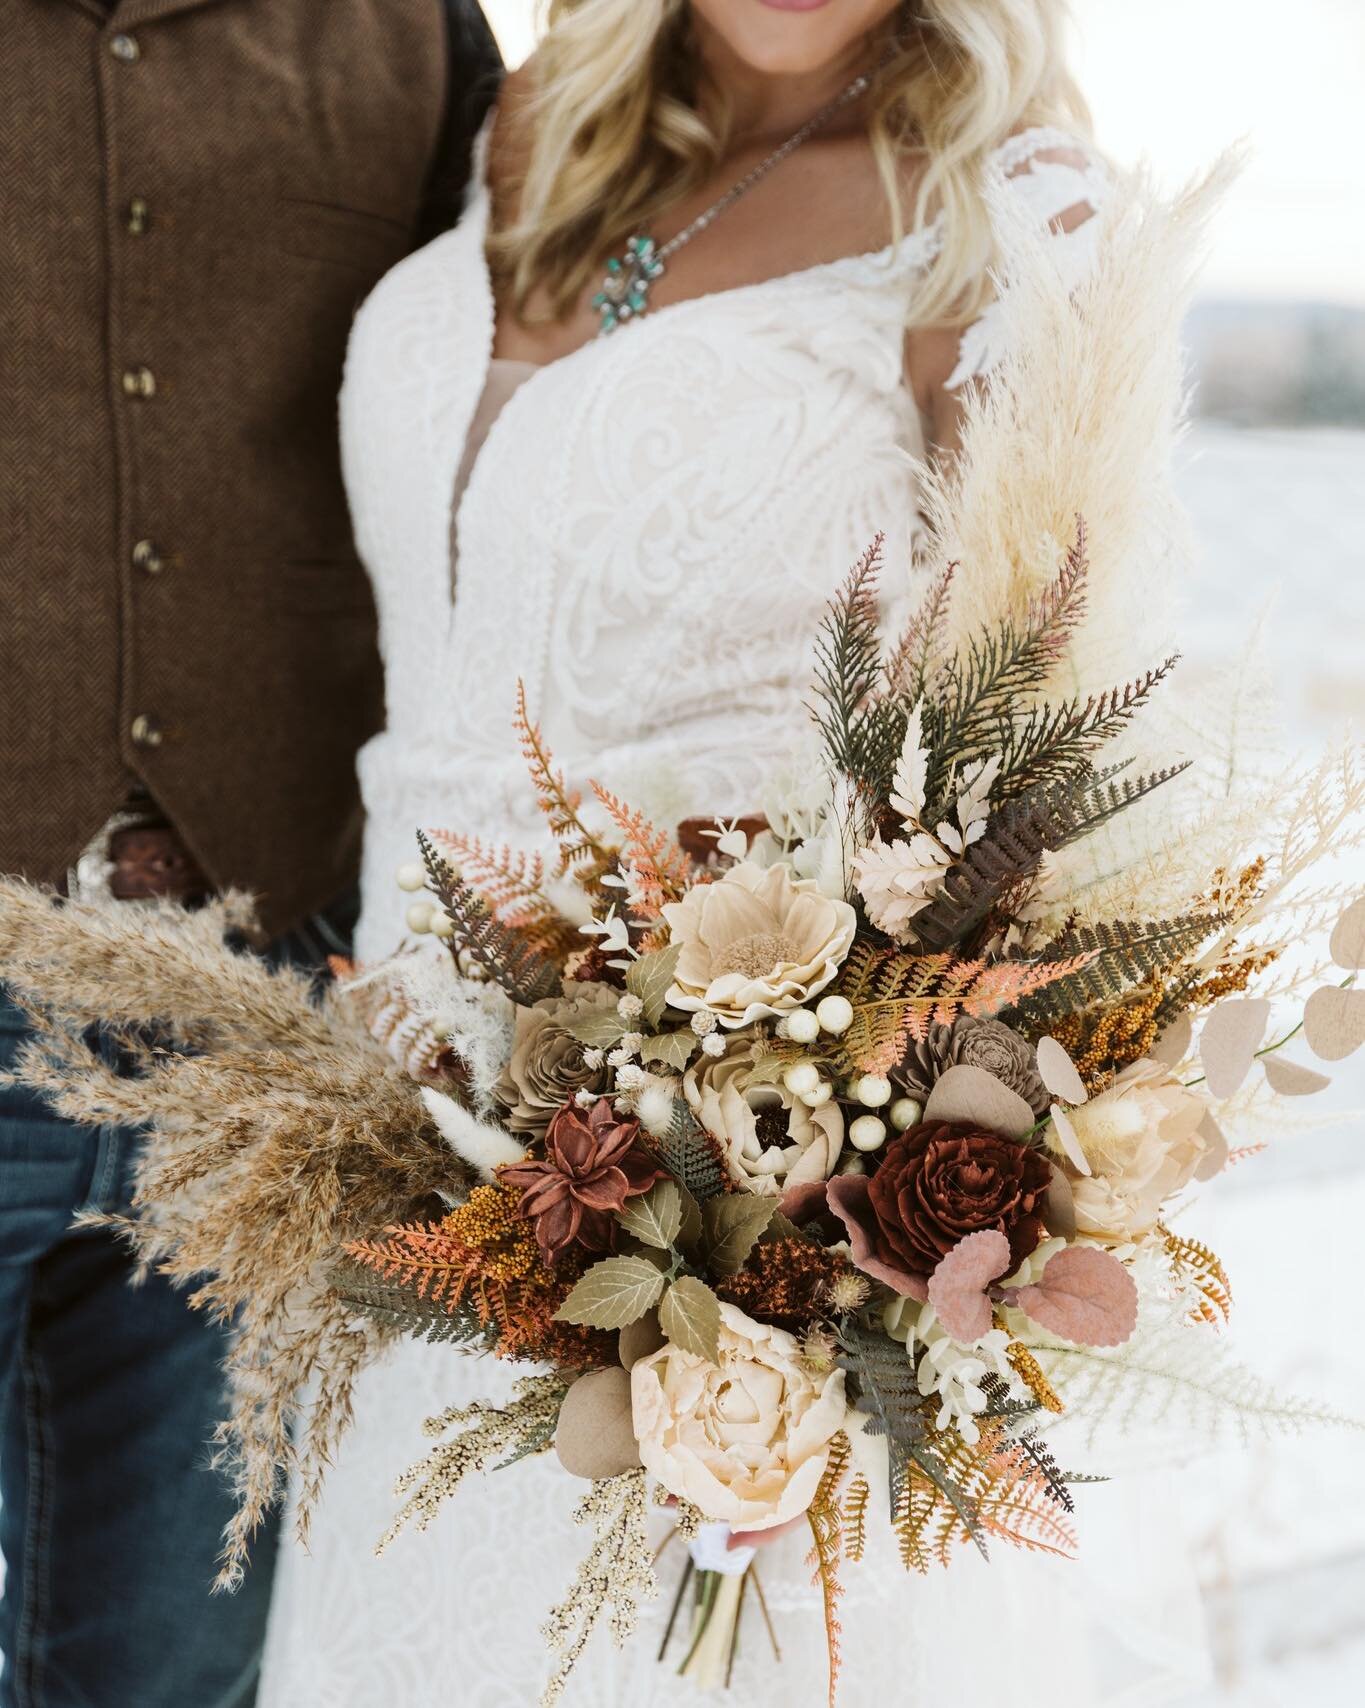 I cannot believe I never shared images of this recent styled shoot! More to come, but for now - a bit of a sneak peak! I feel so incredibly lucky to have worked with such amazing and talented vendors. These shoots were stunning! 

Host: @chasinglight